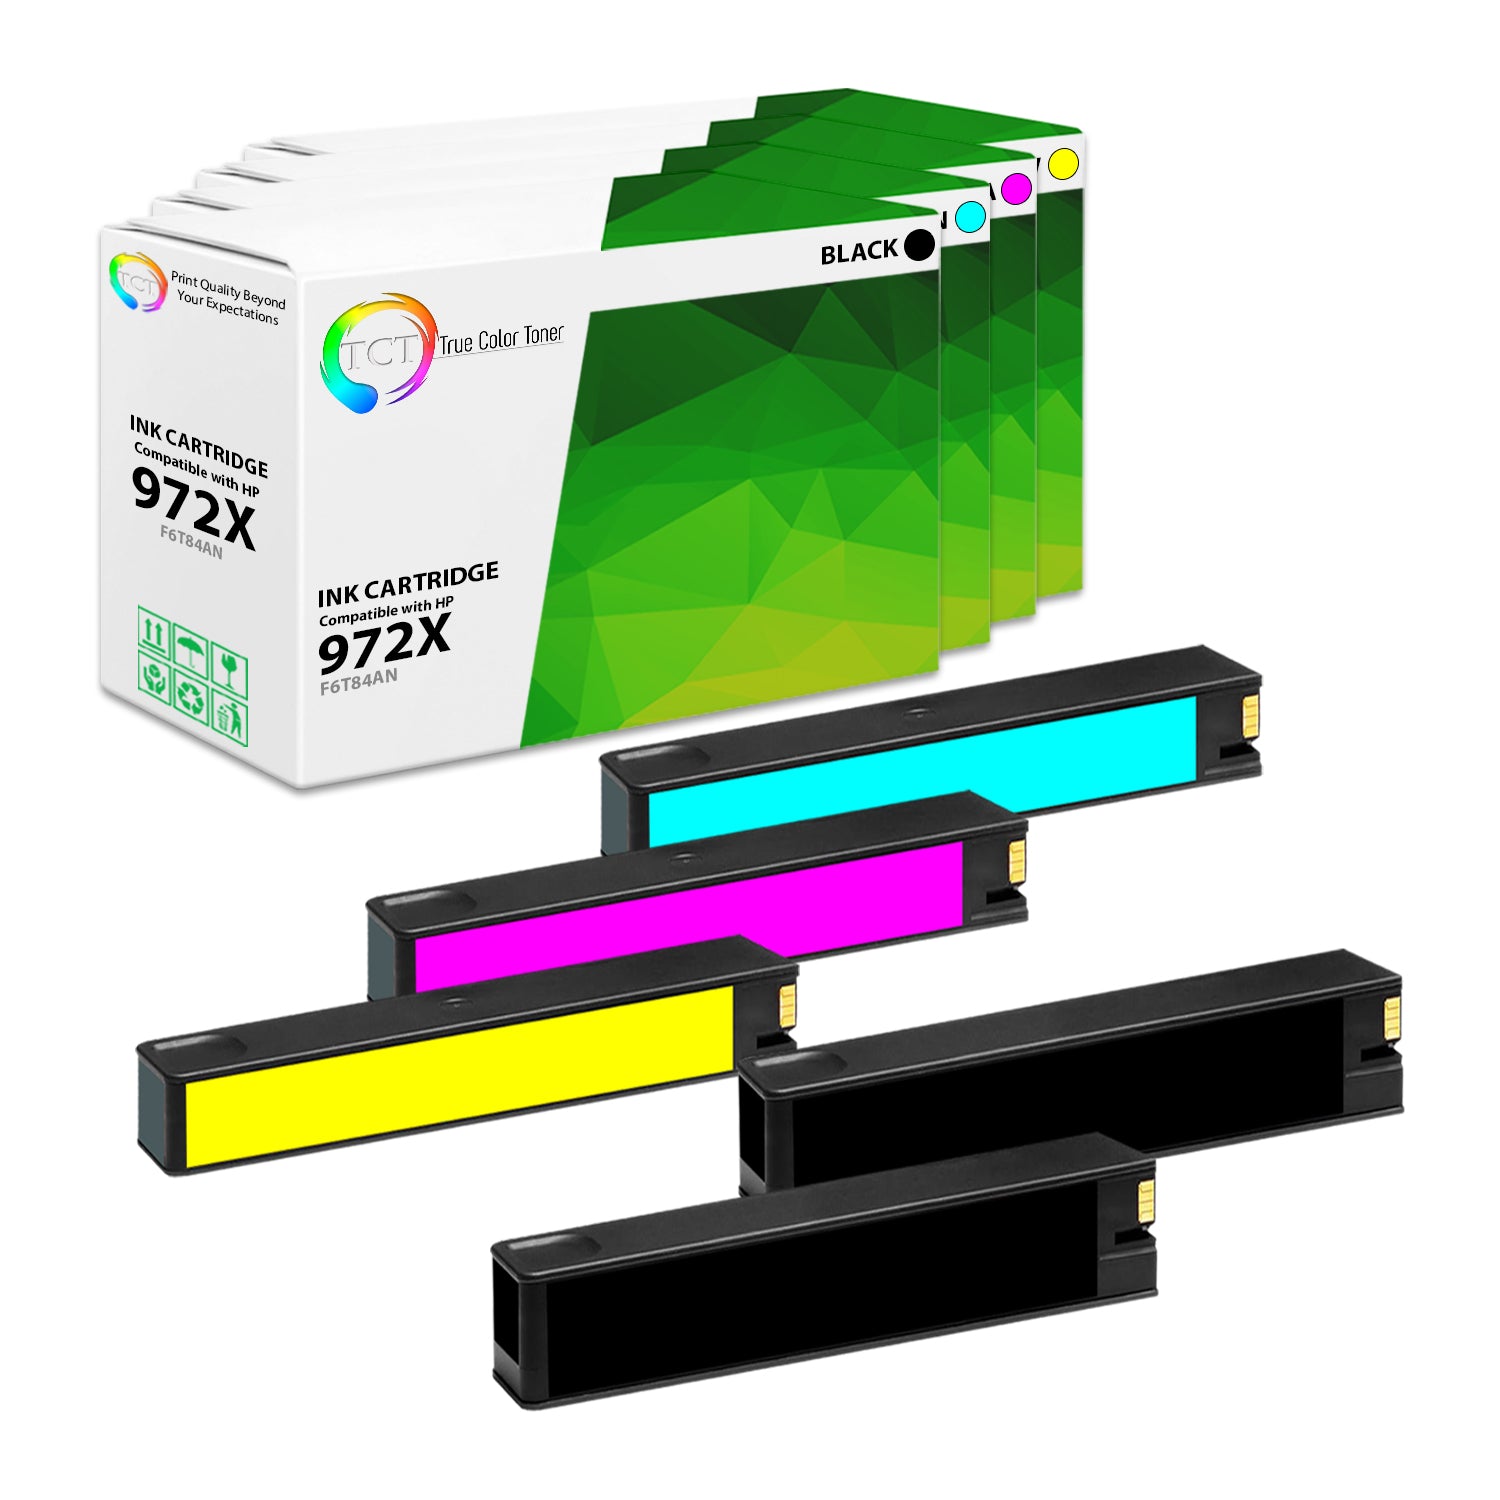 TCT Compatible High Yield Ink Cartridge Replacement for the HP 972X Series - 5 Pack (B, C, M, Y)